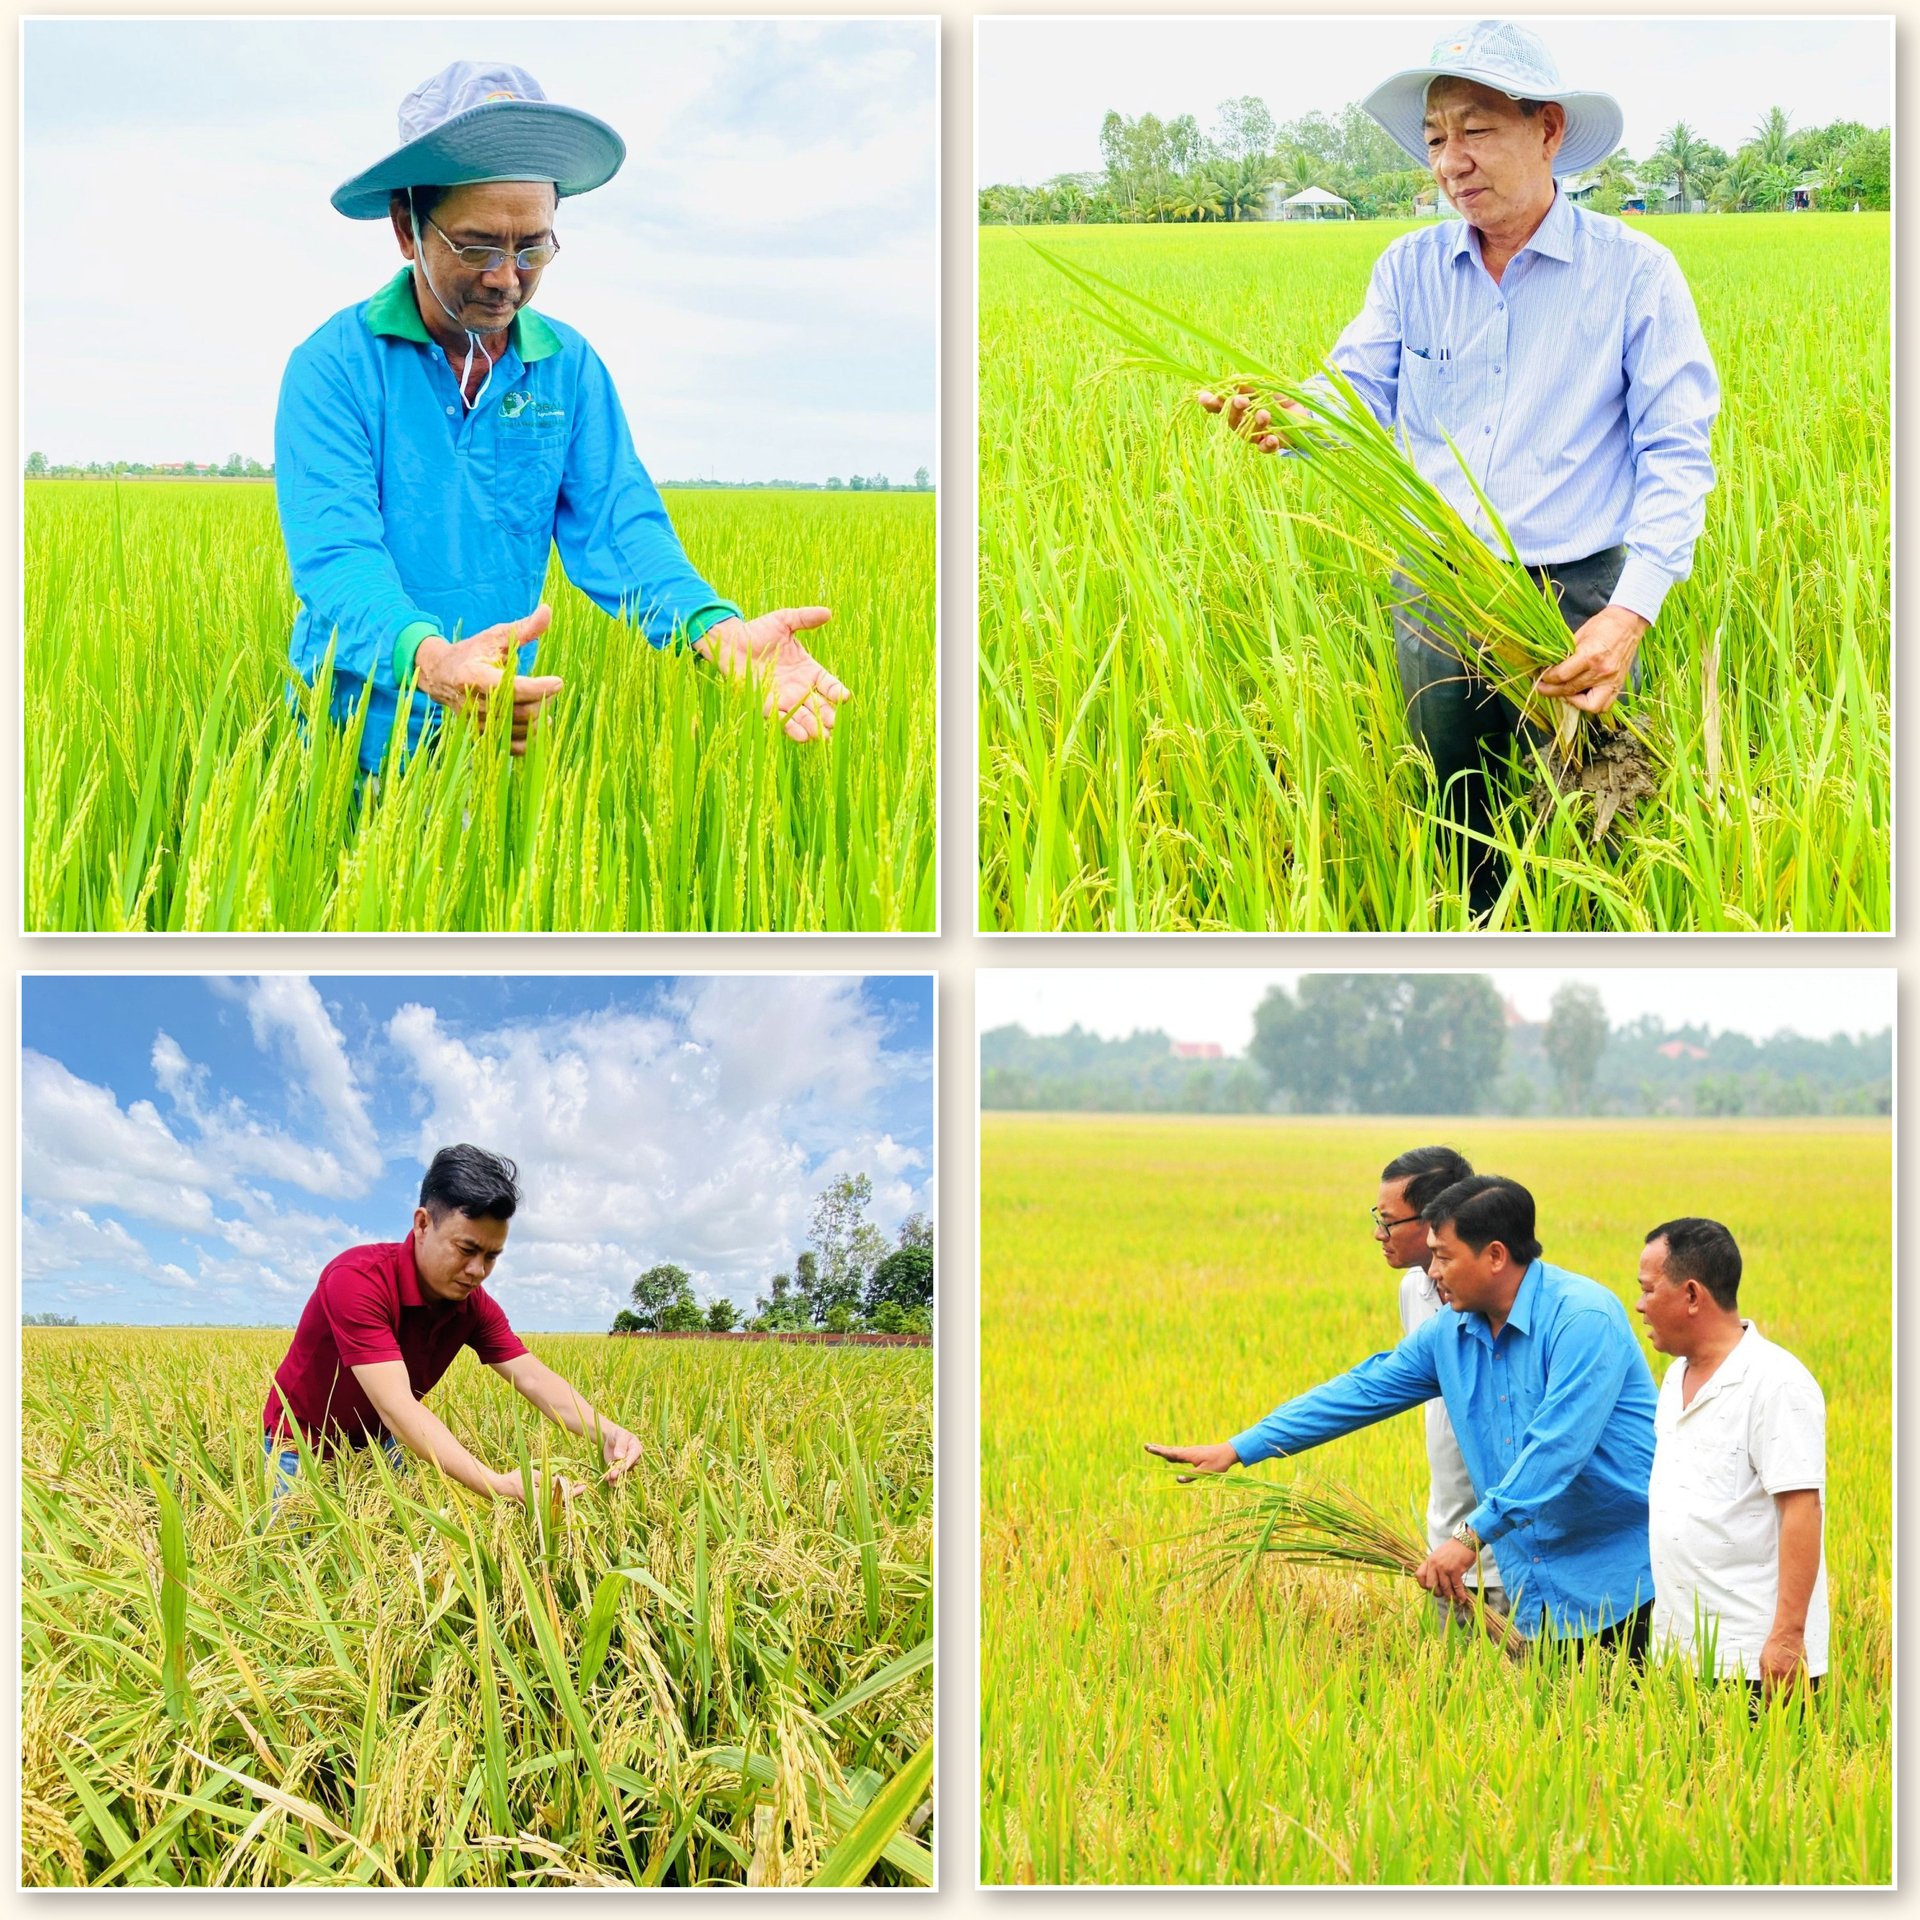 From 'eat well and dress warmly' to 'eat well and dress well', the song 'praise the rice plant' sounds like adding joy, motivation and pride to rice growers.